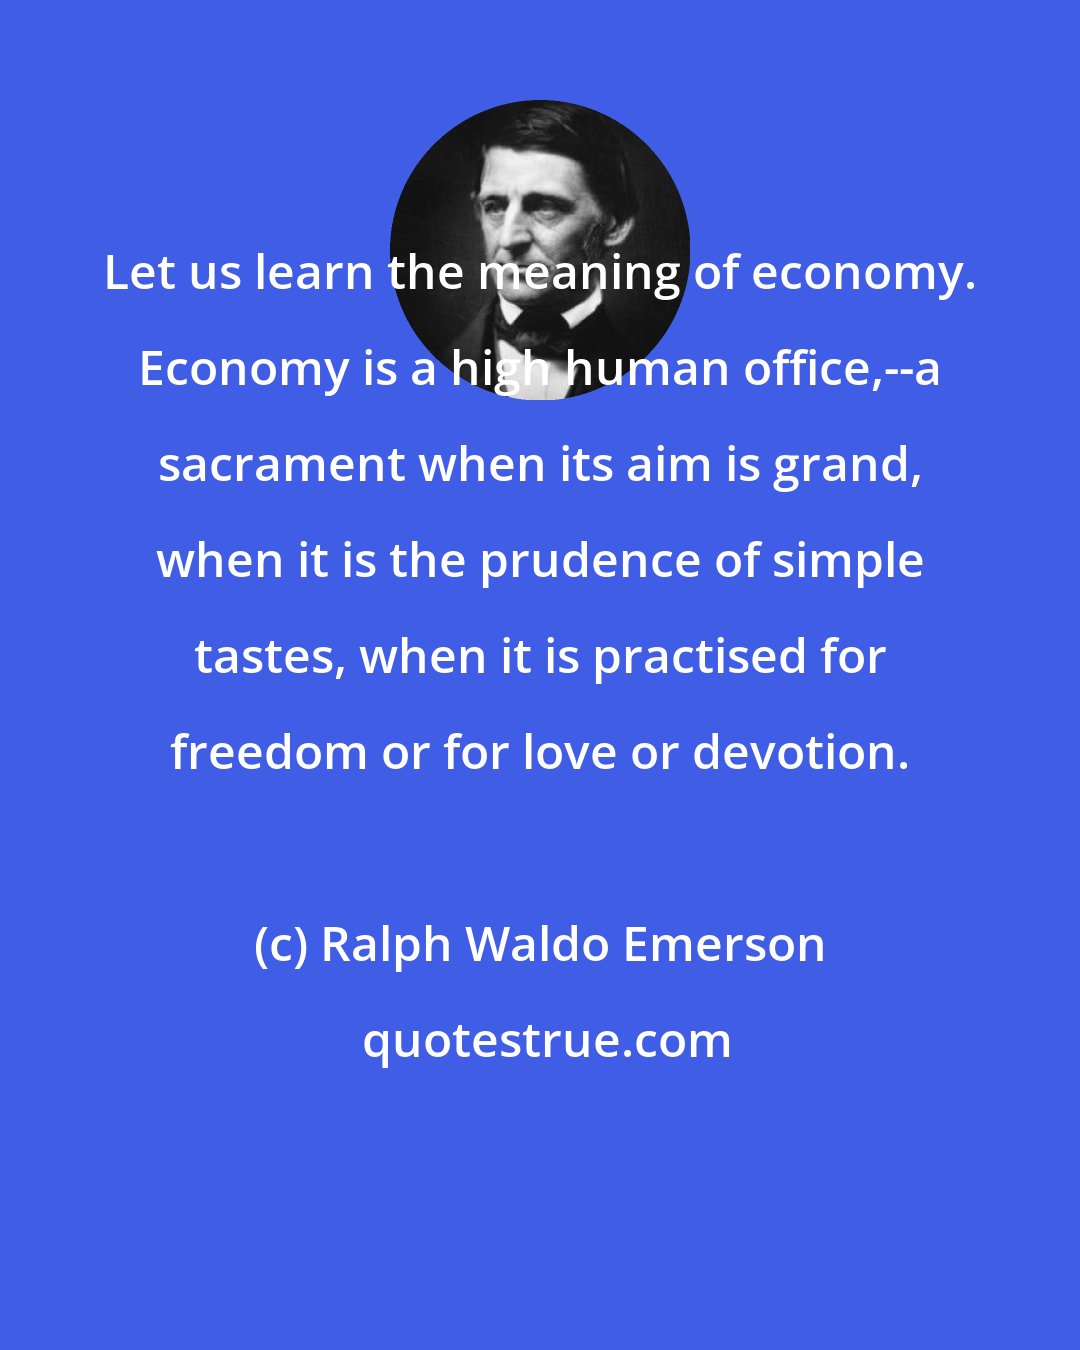 Ralph Waldo Emerson: Let us learn the meaning of economy. Economy is a high human office,--a sacrament when its aim is grand, when it is the prudence of simple tastes, when it is practised for freedom or for love or devotion.